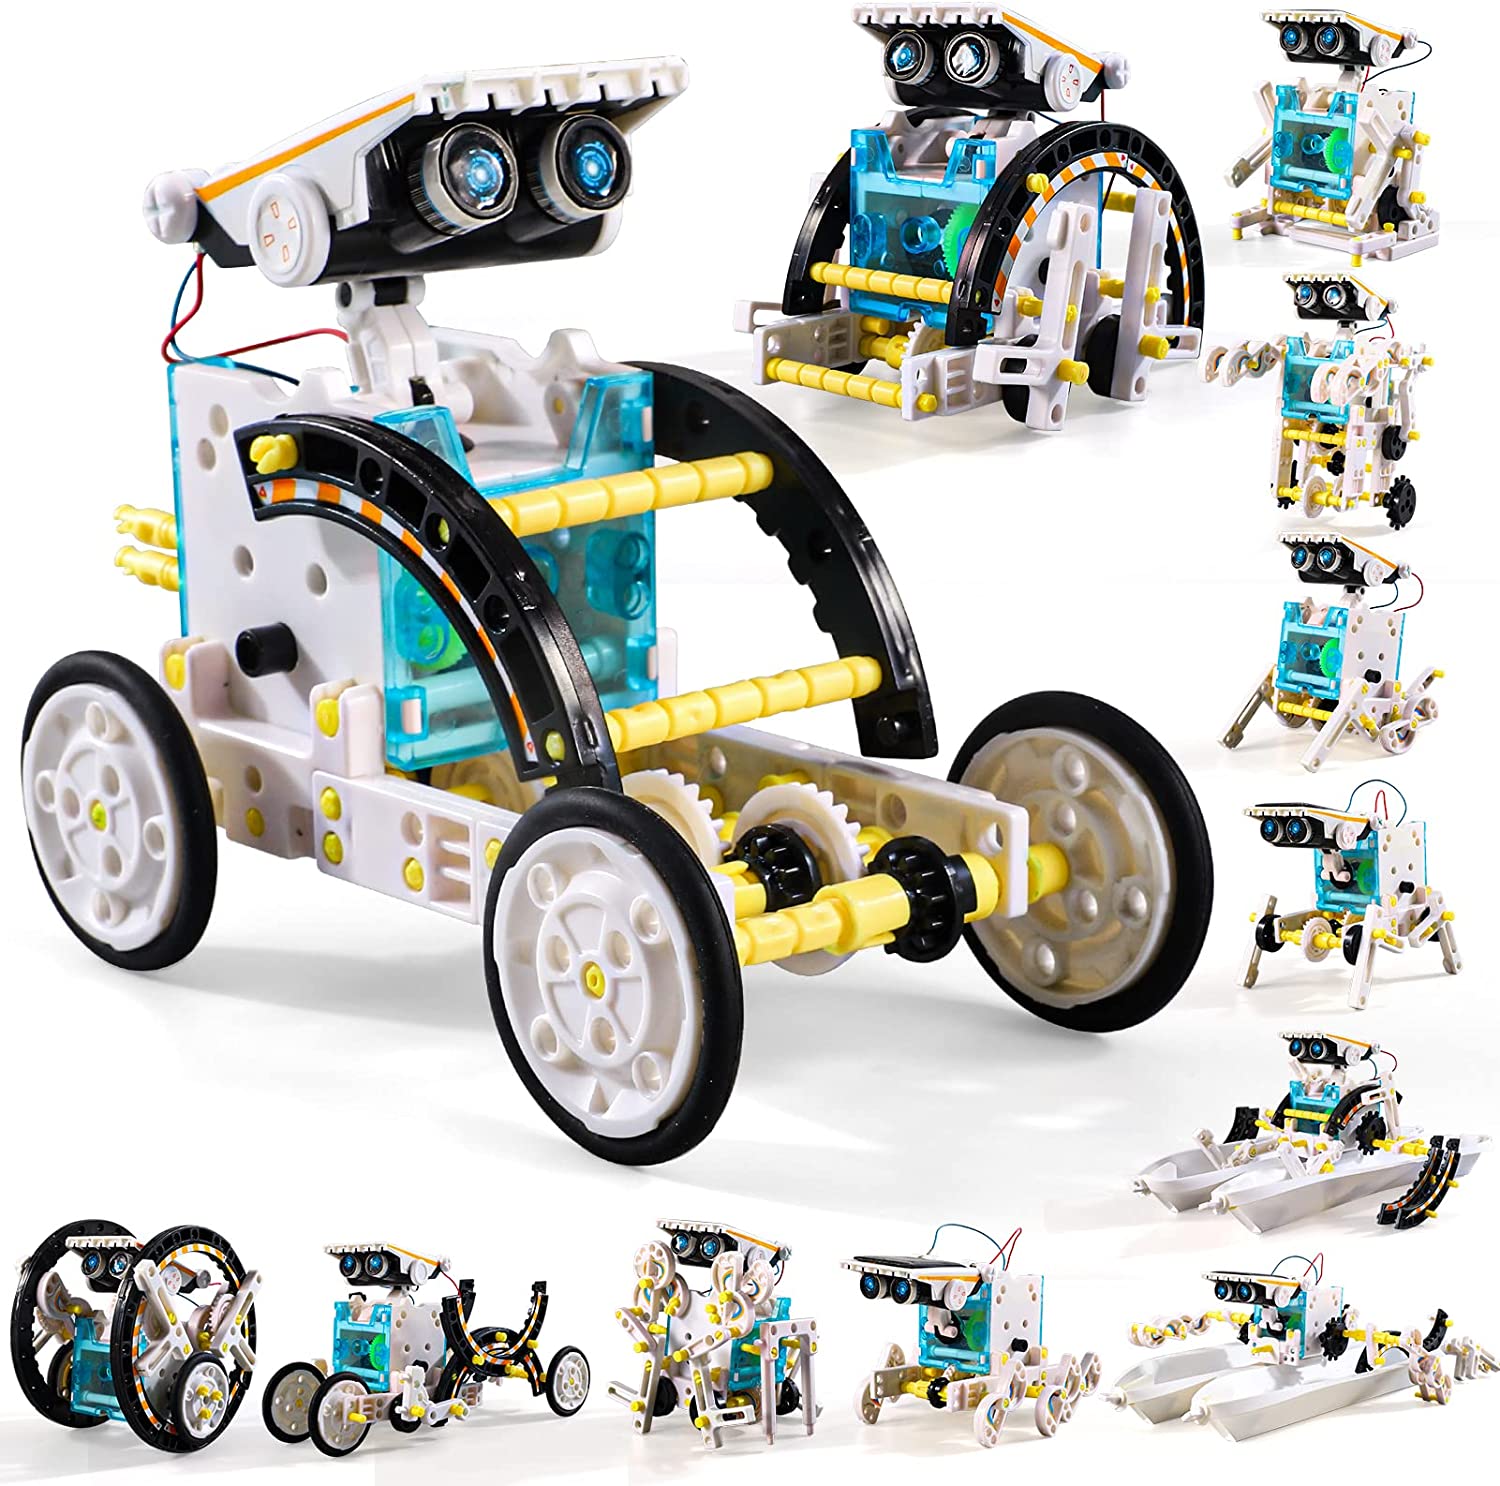 12-in-1 STEM Solar Robot Kit Toys Gifts for Kids 8 9 10 11 12 13 Years Old, Educational Building Science Experiment Set Birthday for Kids Boys Girls-Back to results-ridibi